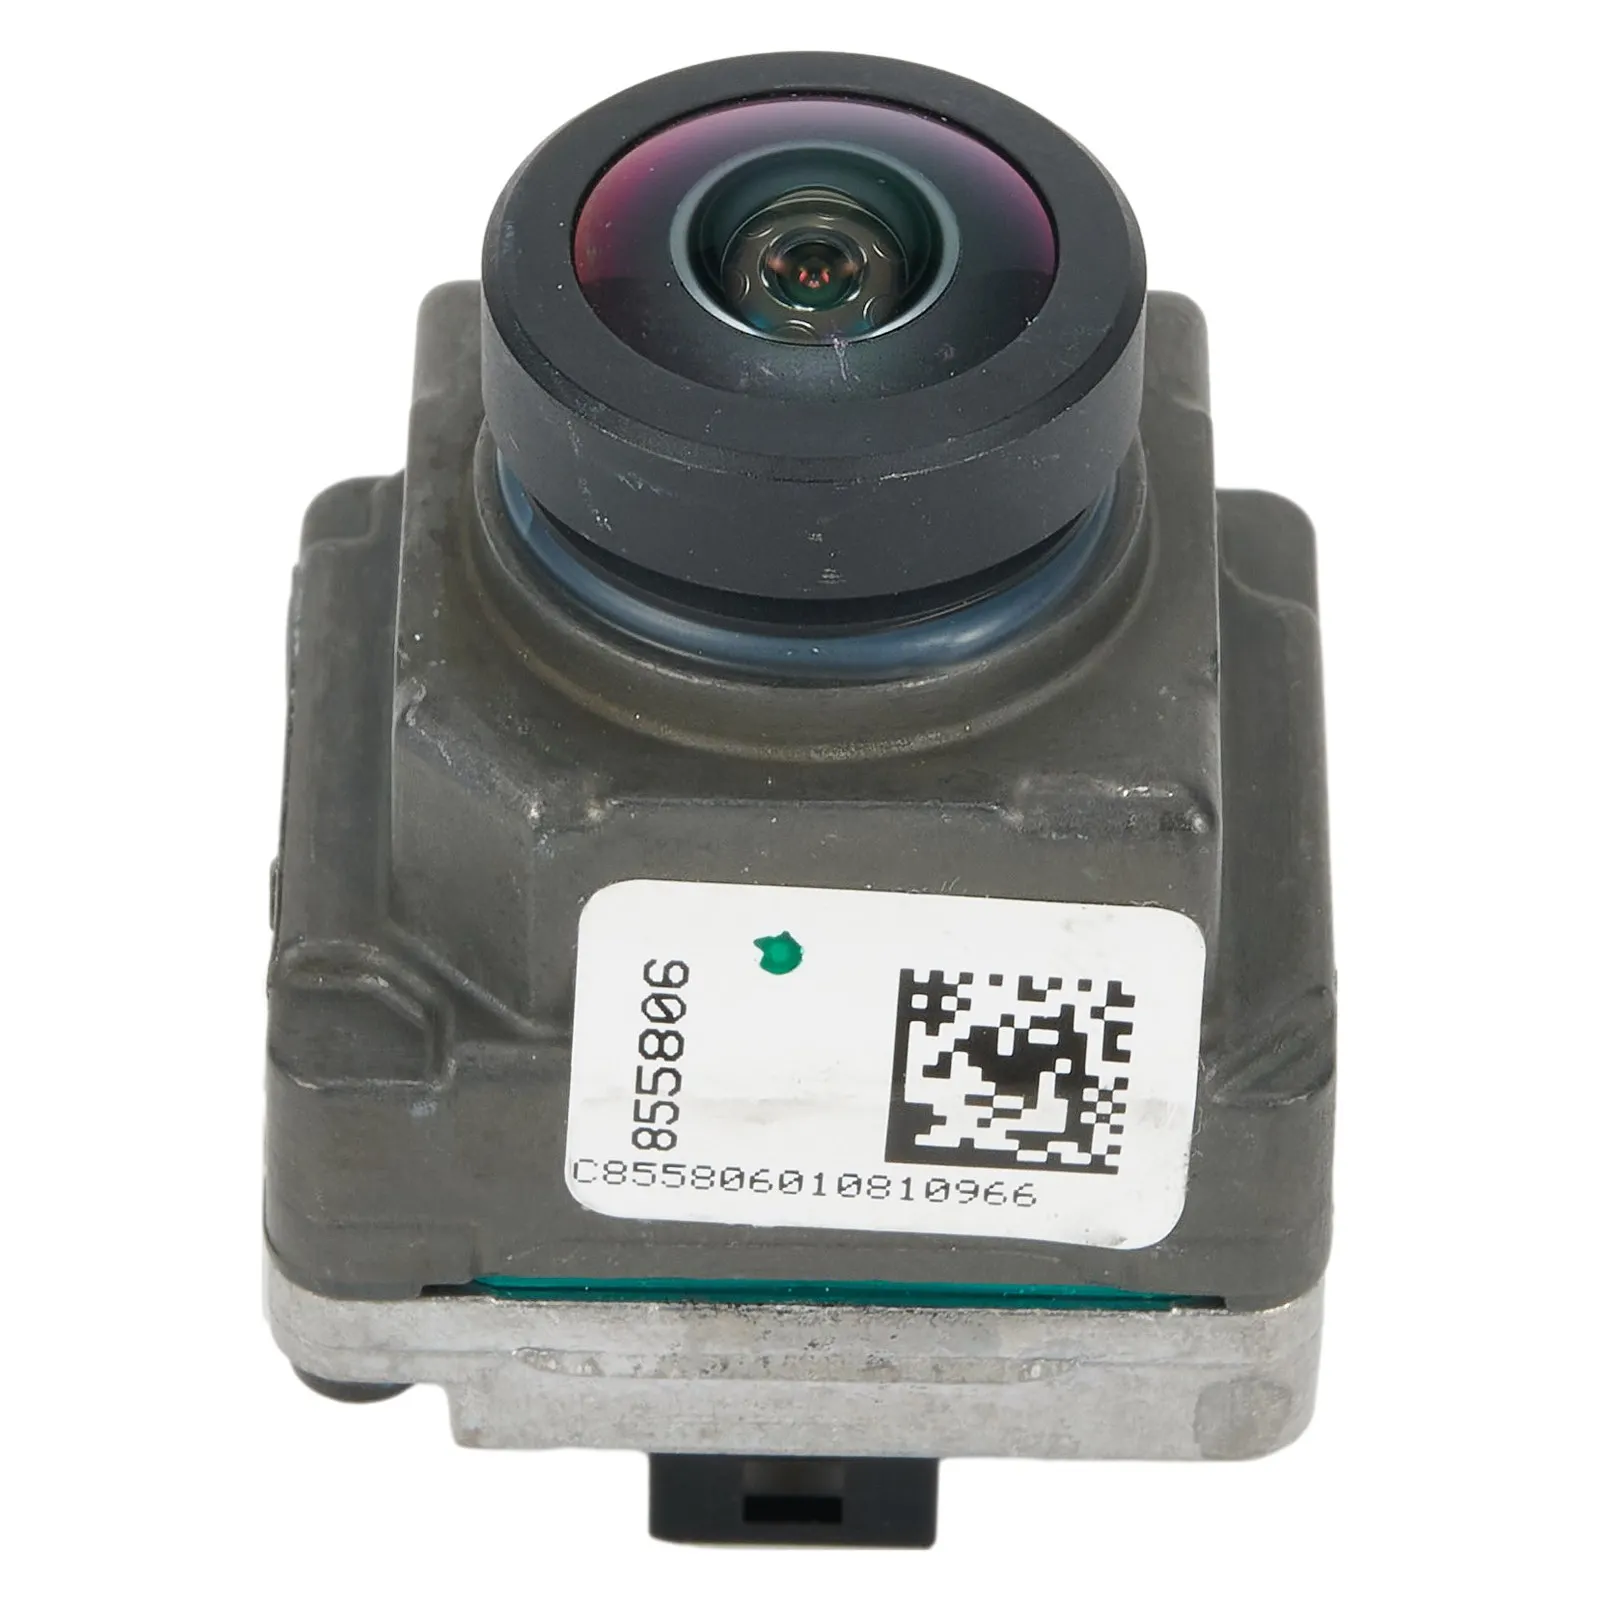 

High Quality New Style Camera FW93-19H422-AB LR060915 Wear-resistant Components Corrosion-resistant Electronic